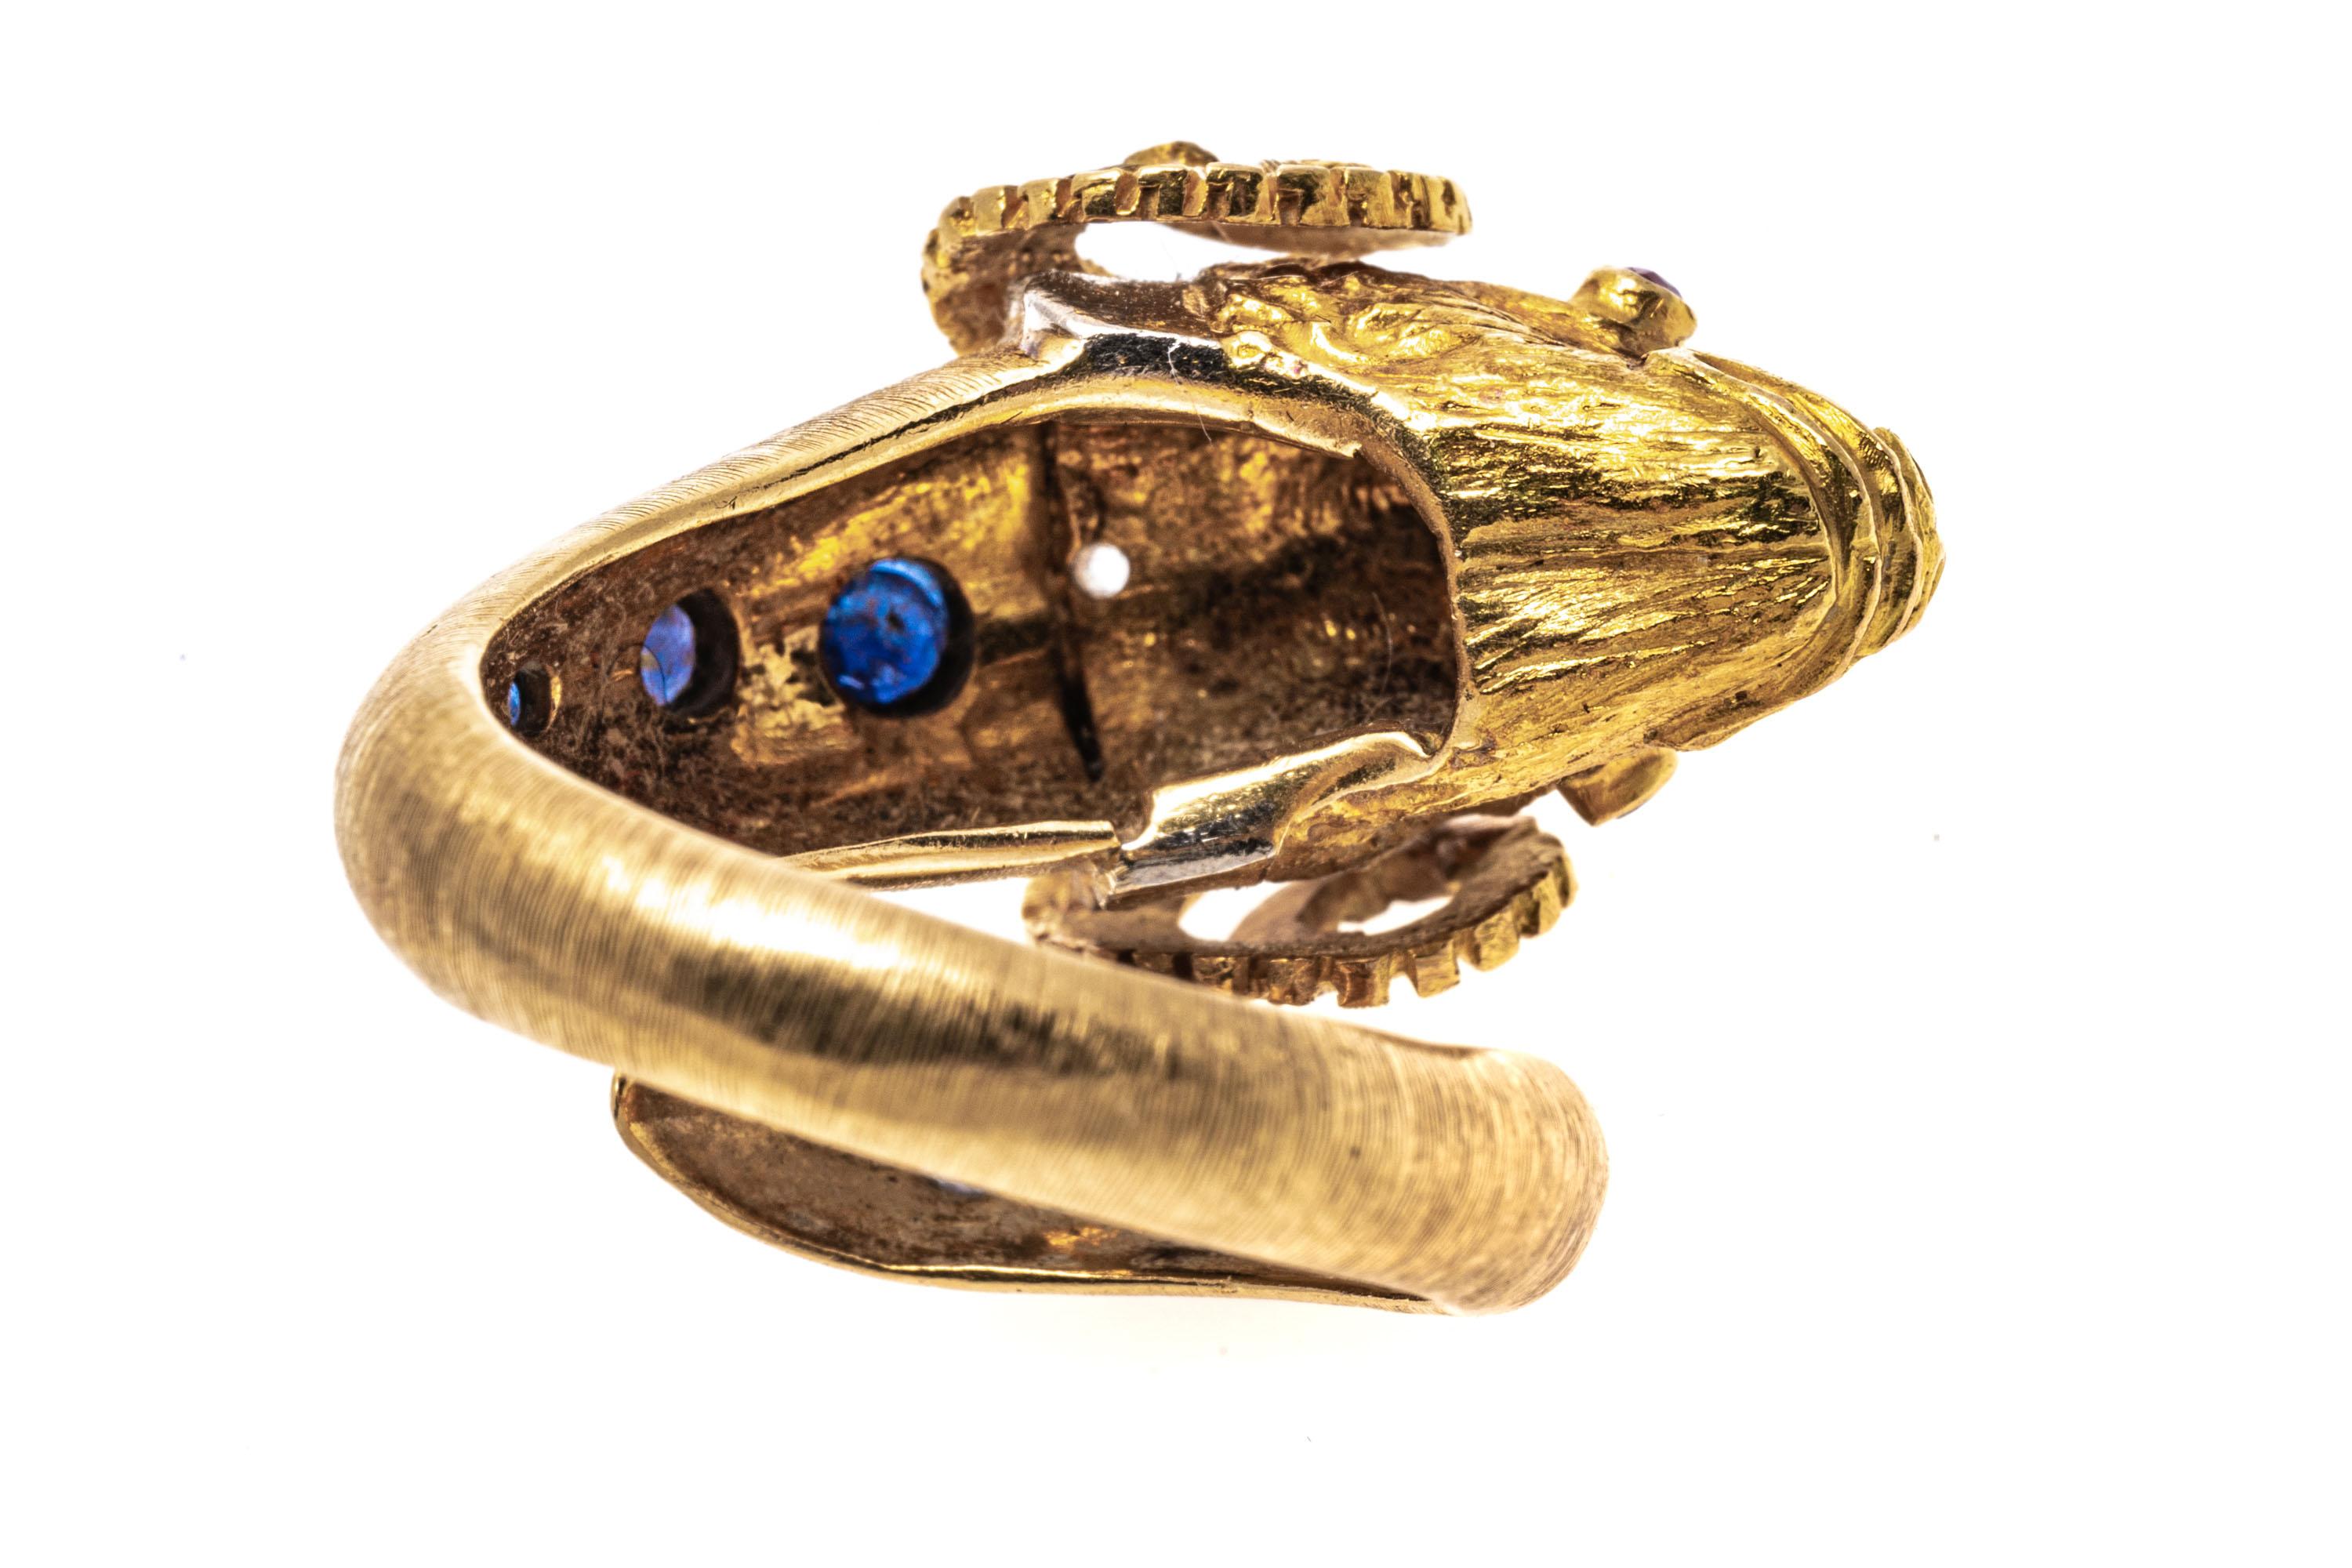 14k Yellow Gold Rams Head Ring With Sapphires, Rubies And Diamonds, Size 7-8 In Good Condition For Sale In Southport, CT